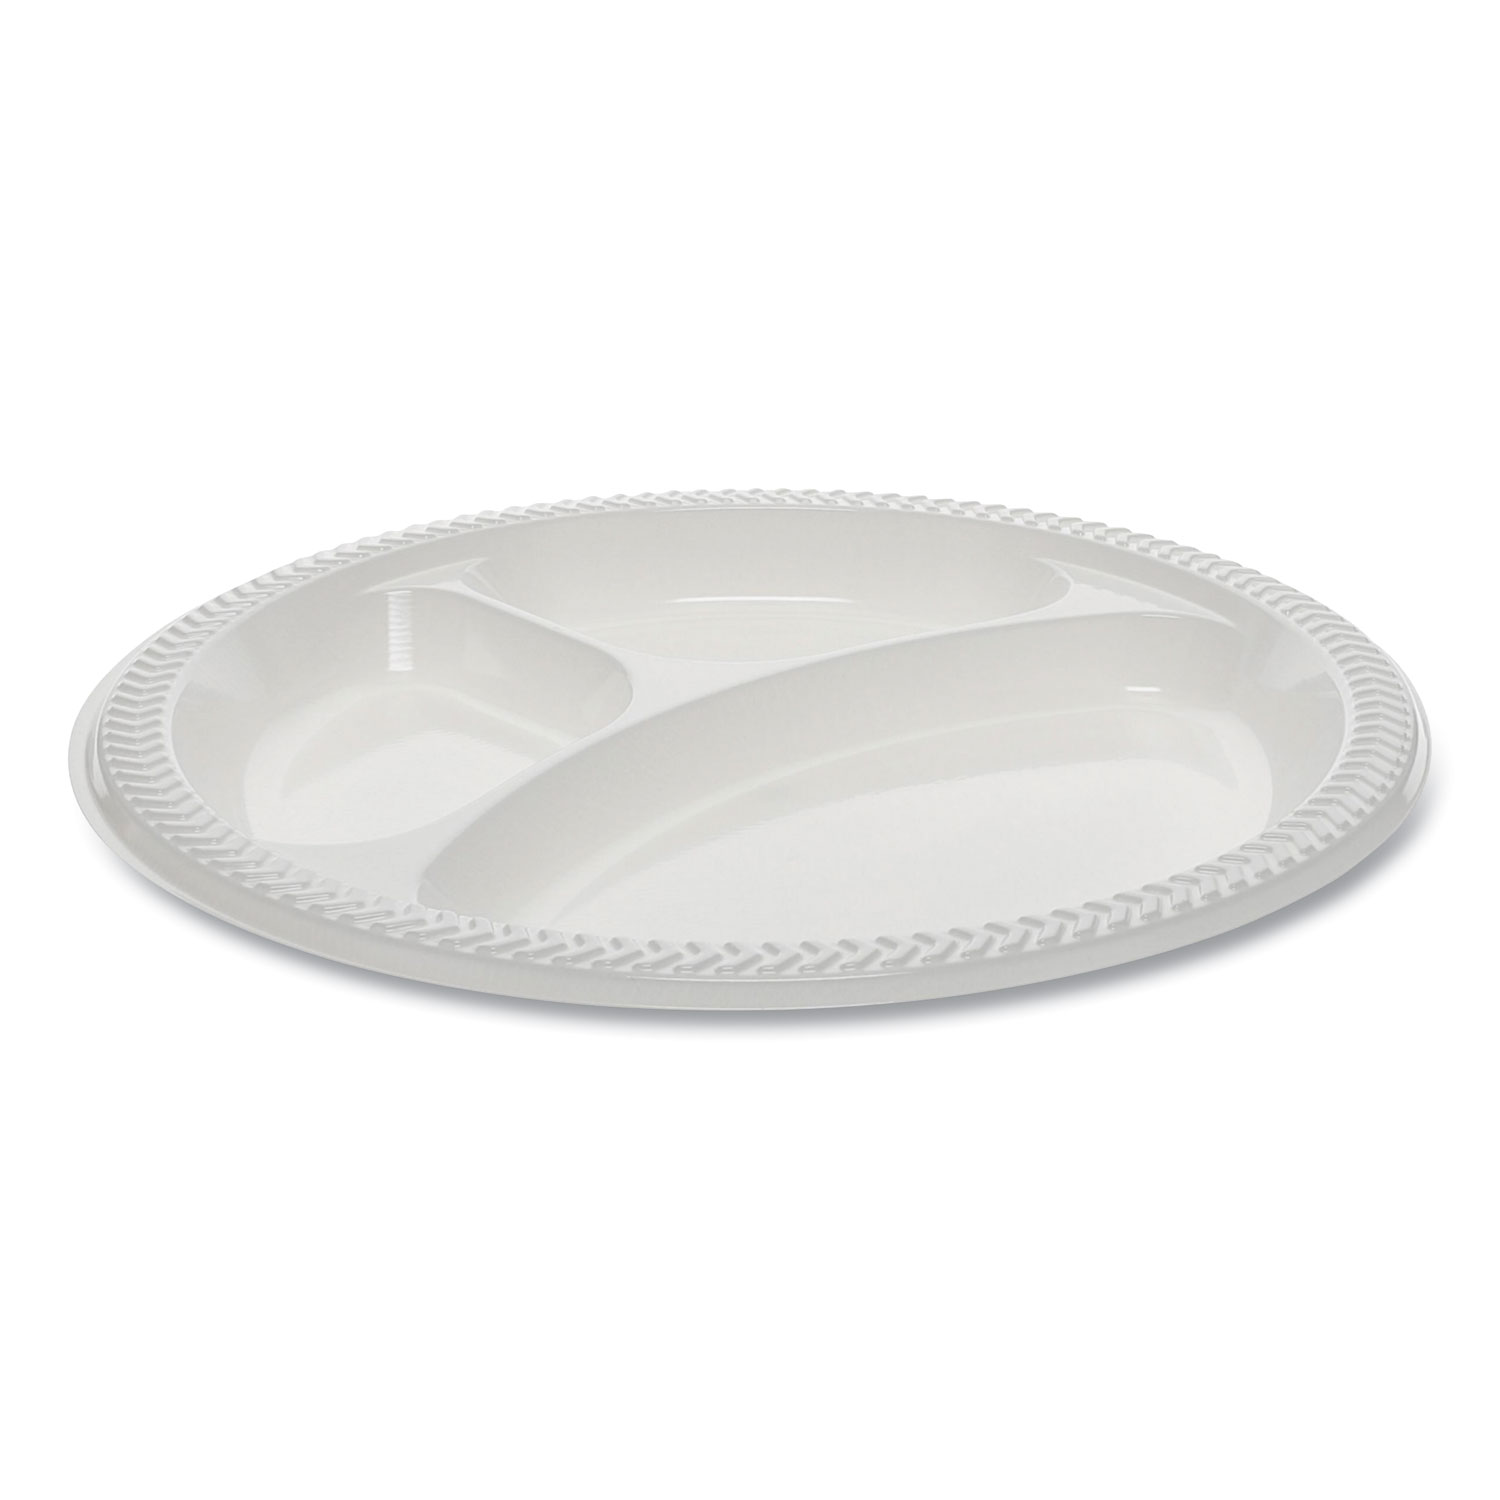  Pactiv YMIC9 Meadoware OPS Dinnerware, 3-Compartment Plate, 8.88 Diameter, White, 400/Carton (PCTYMIC9) 